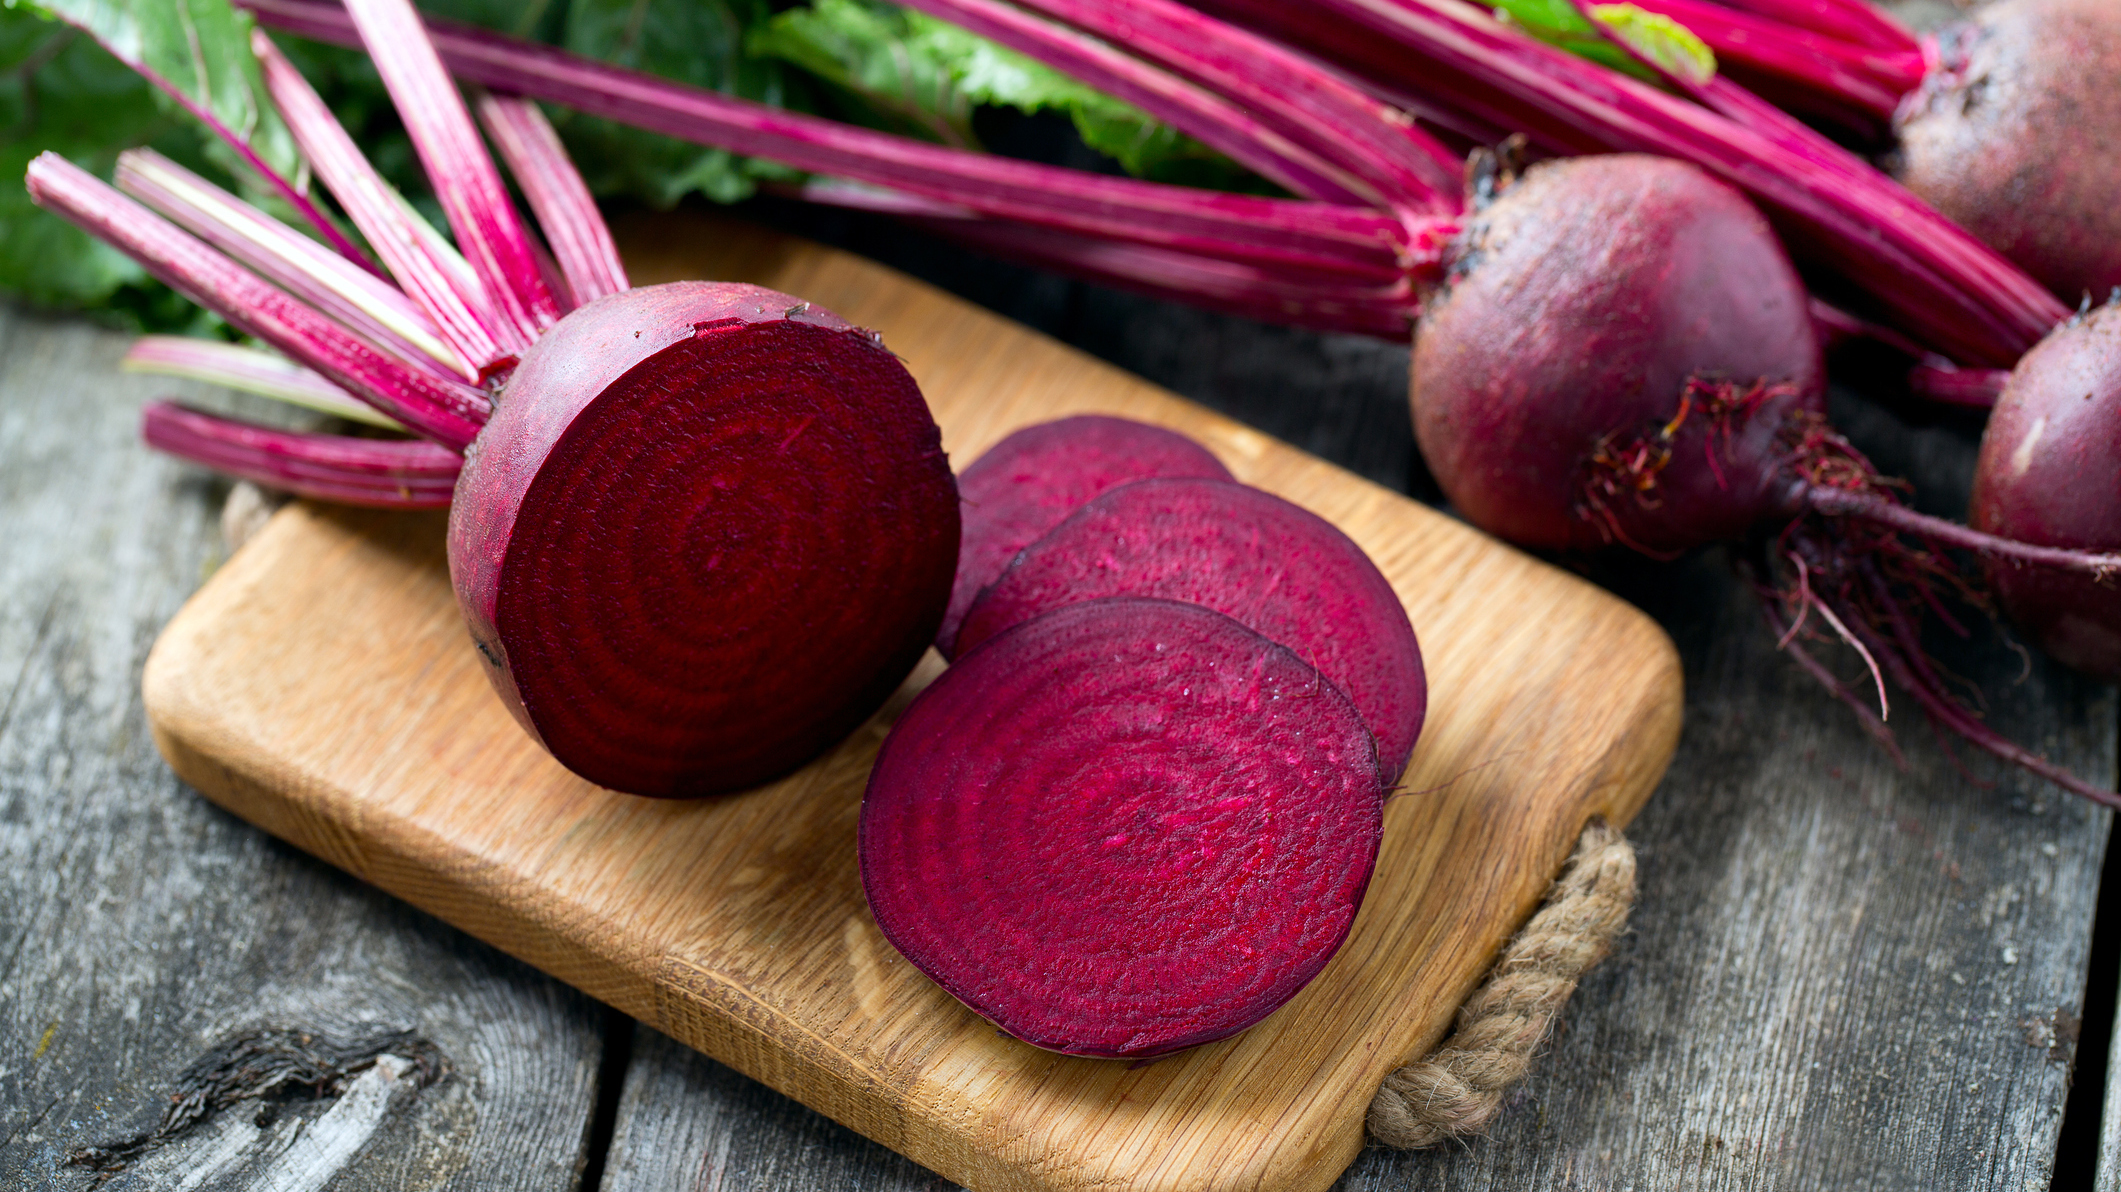 What Are The Health Benefits Of Eating Beets